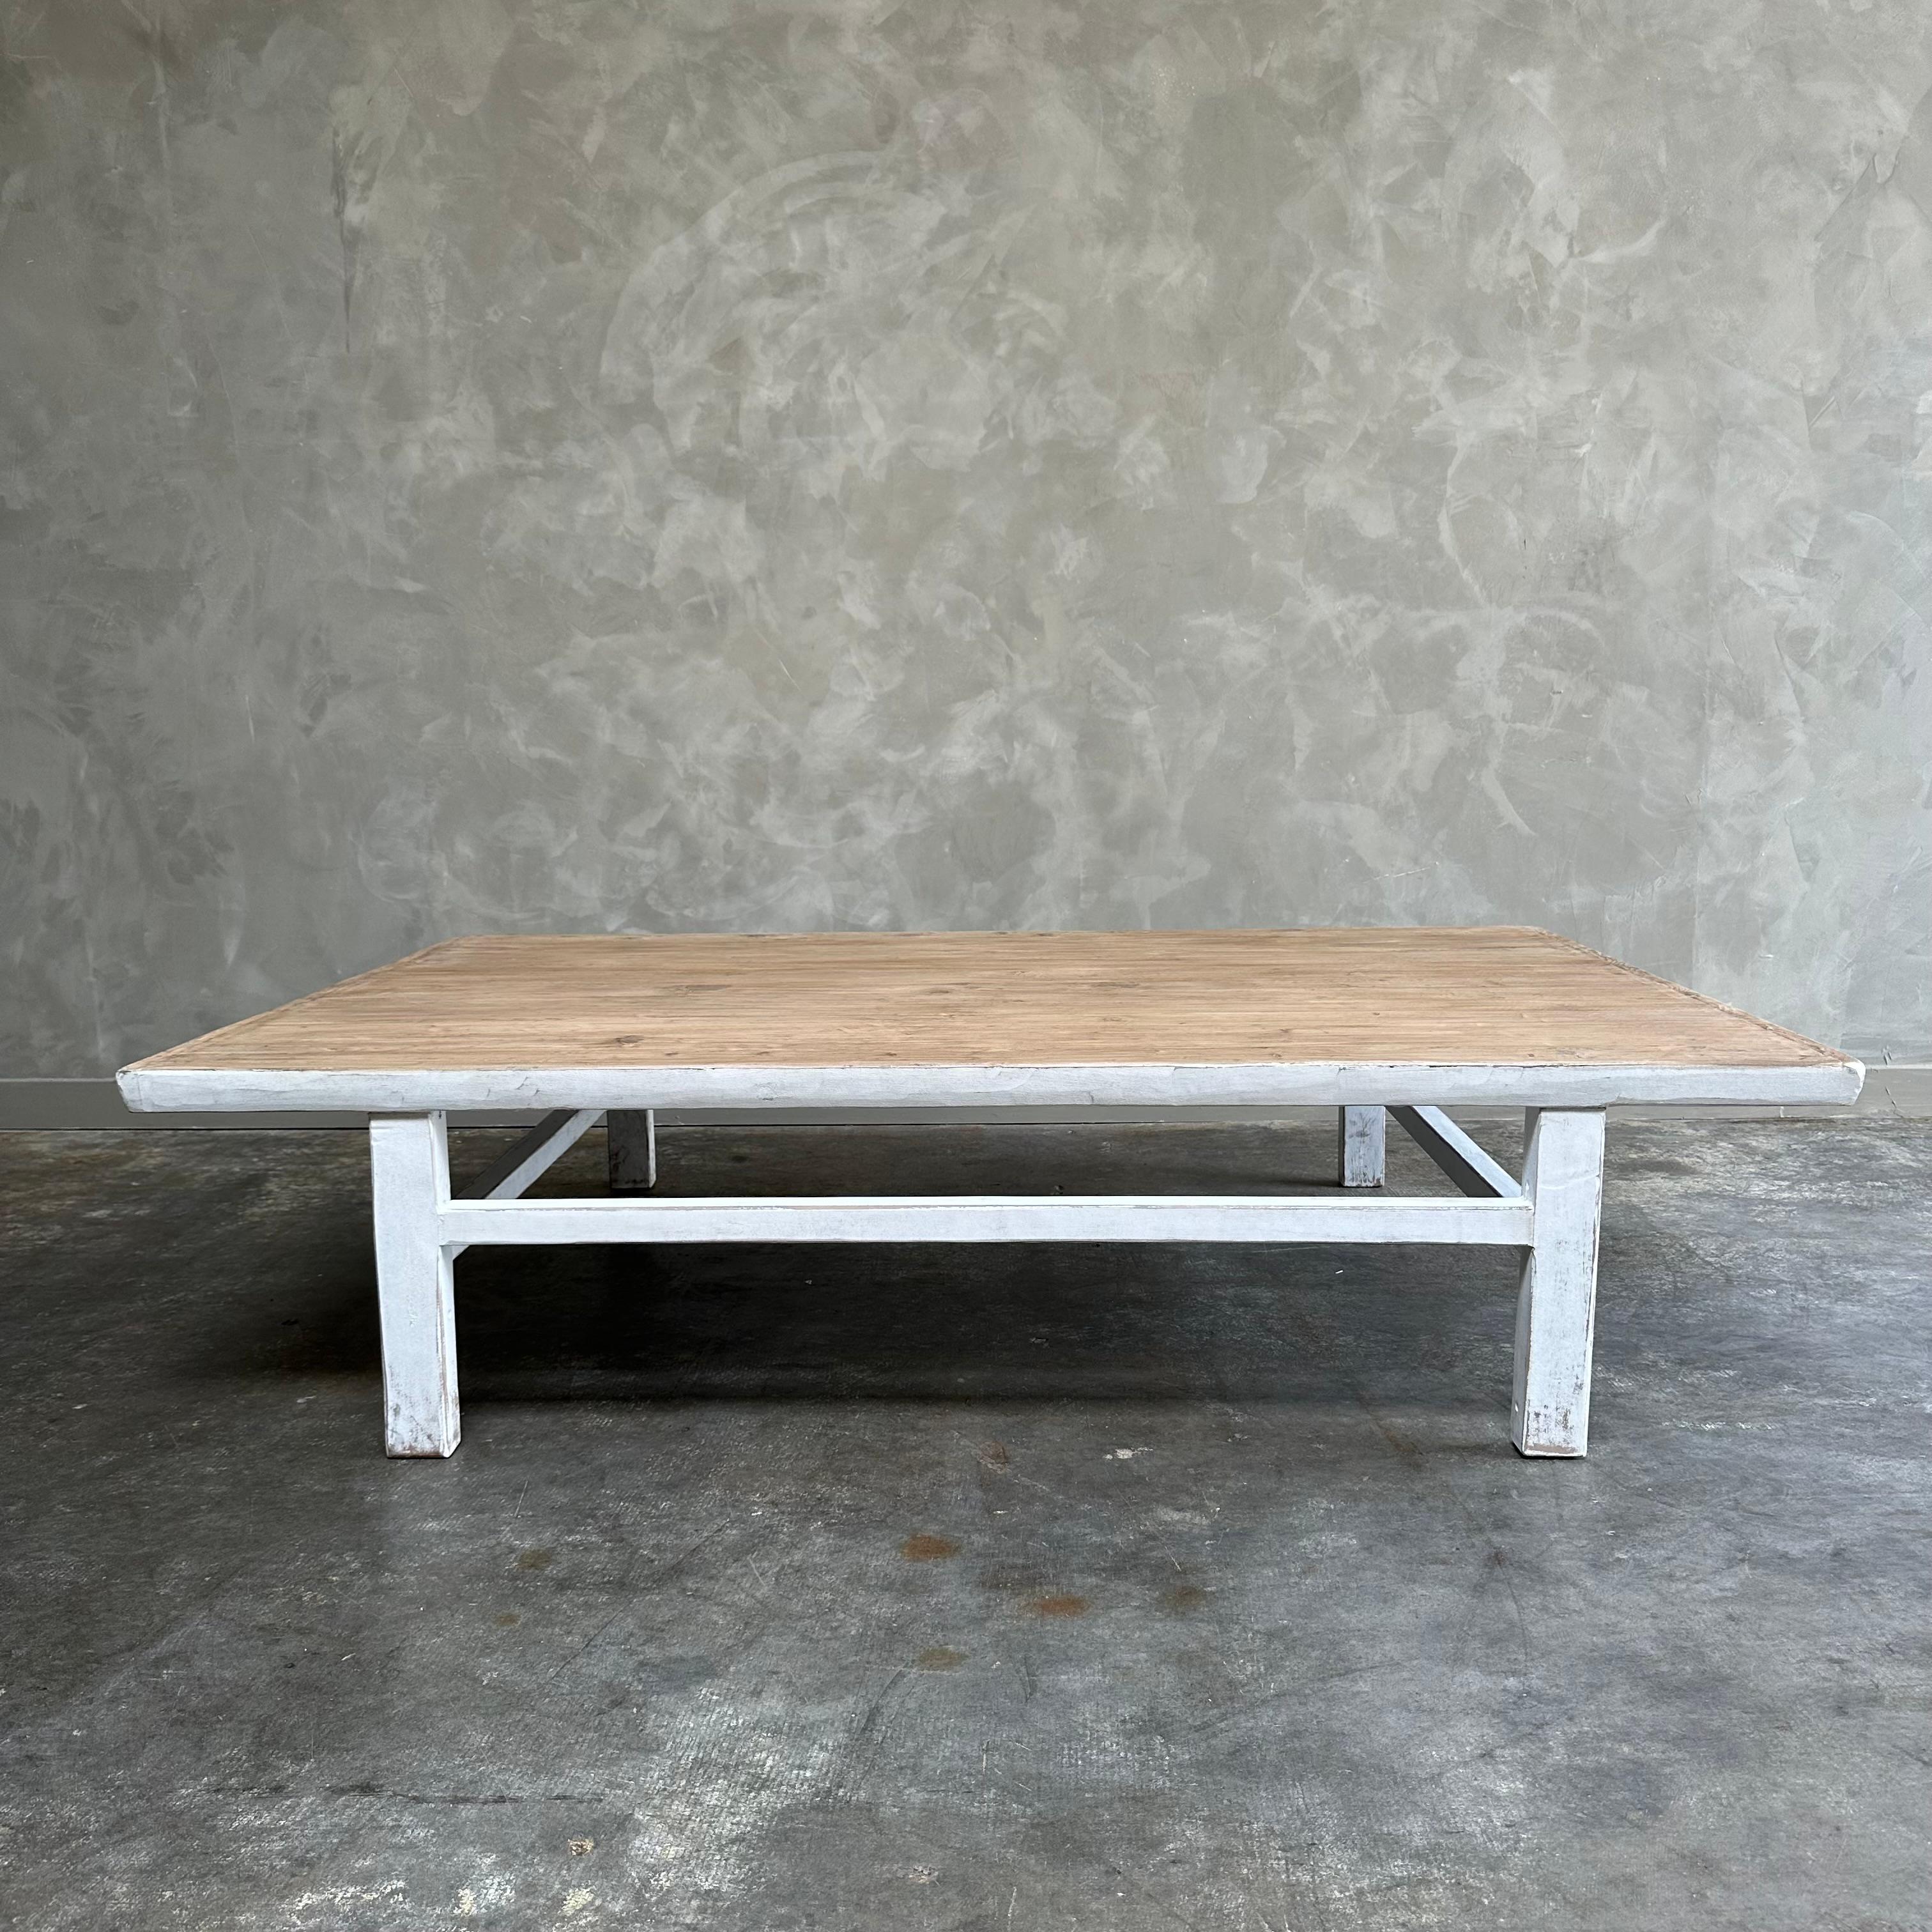 Custom made bloom home inc. collection.
Large Alma Coffee table with painted base.  The top is a natural raw reclaimed elm wood with smoother finish.
Base is white distress, also available in black distress or all solid wood in bleached finish, or